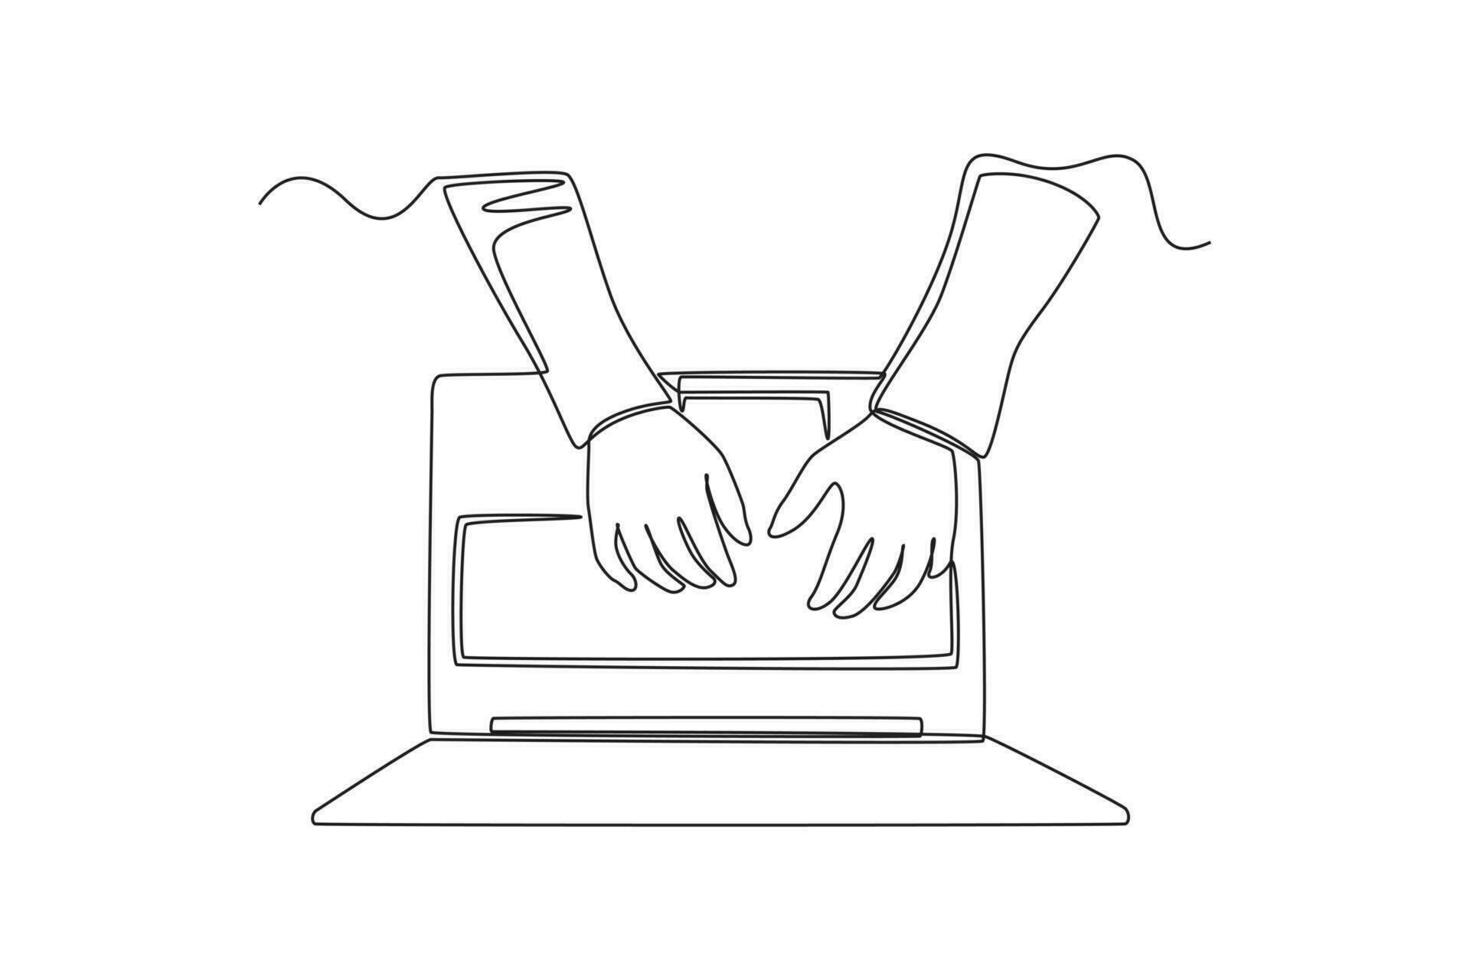 Continuous one line drawing top view hand typing on laptop. Single line draw design vector graphic illustration.